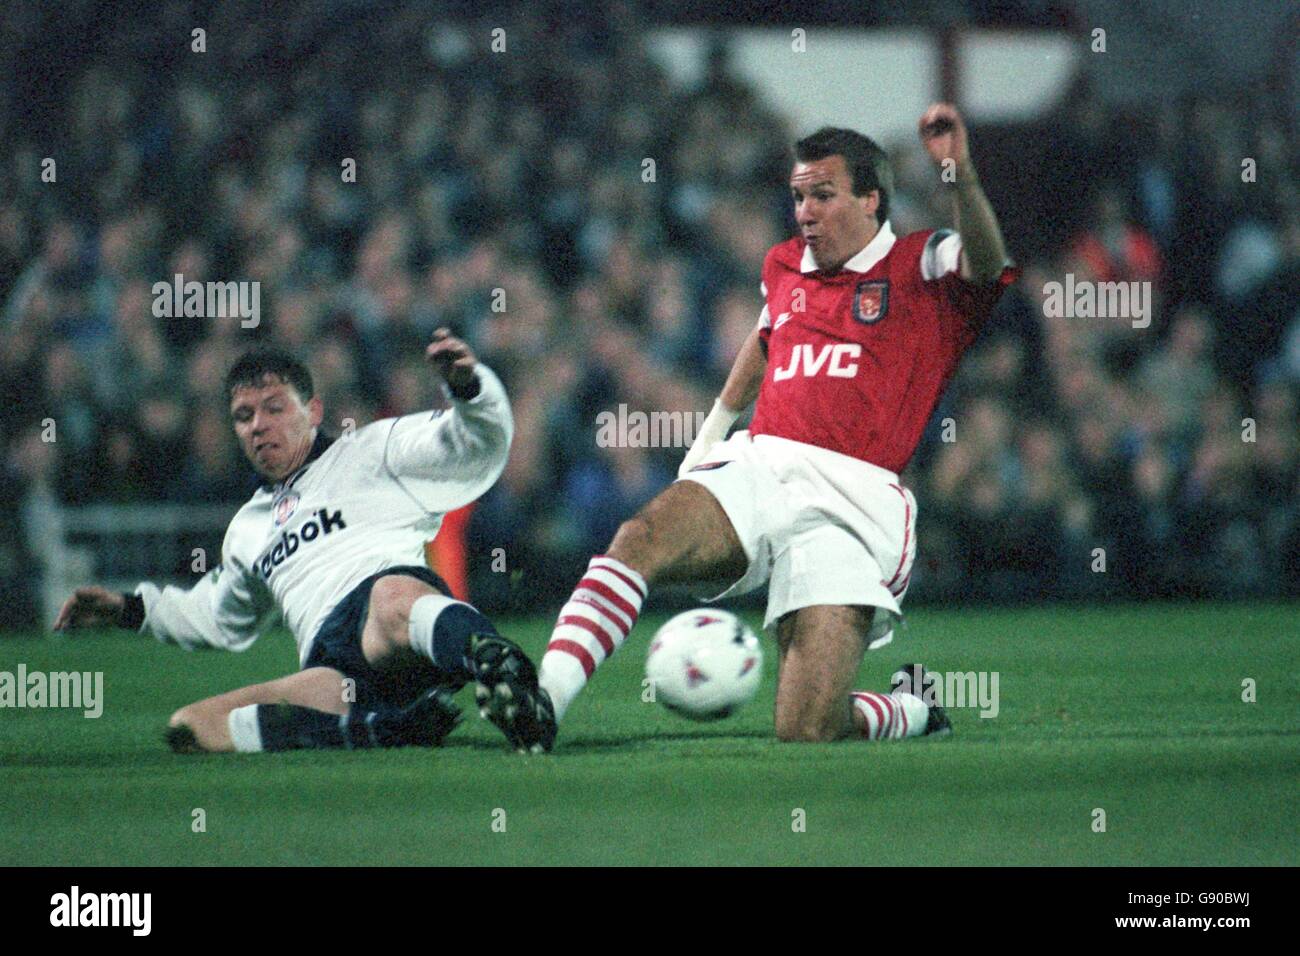 30-OCT-95. Bolton v Arsenal. Alan Thompson Bolton gets the ball away from Paul Merson Arsenal. PIcture by Laurence Griffiths/EMPICS Stock Photo